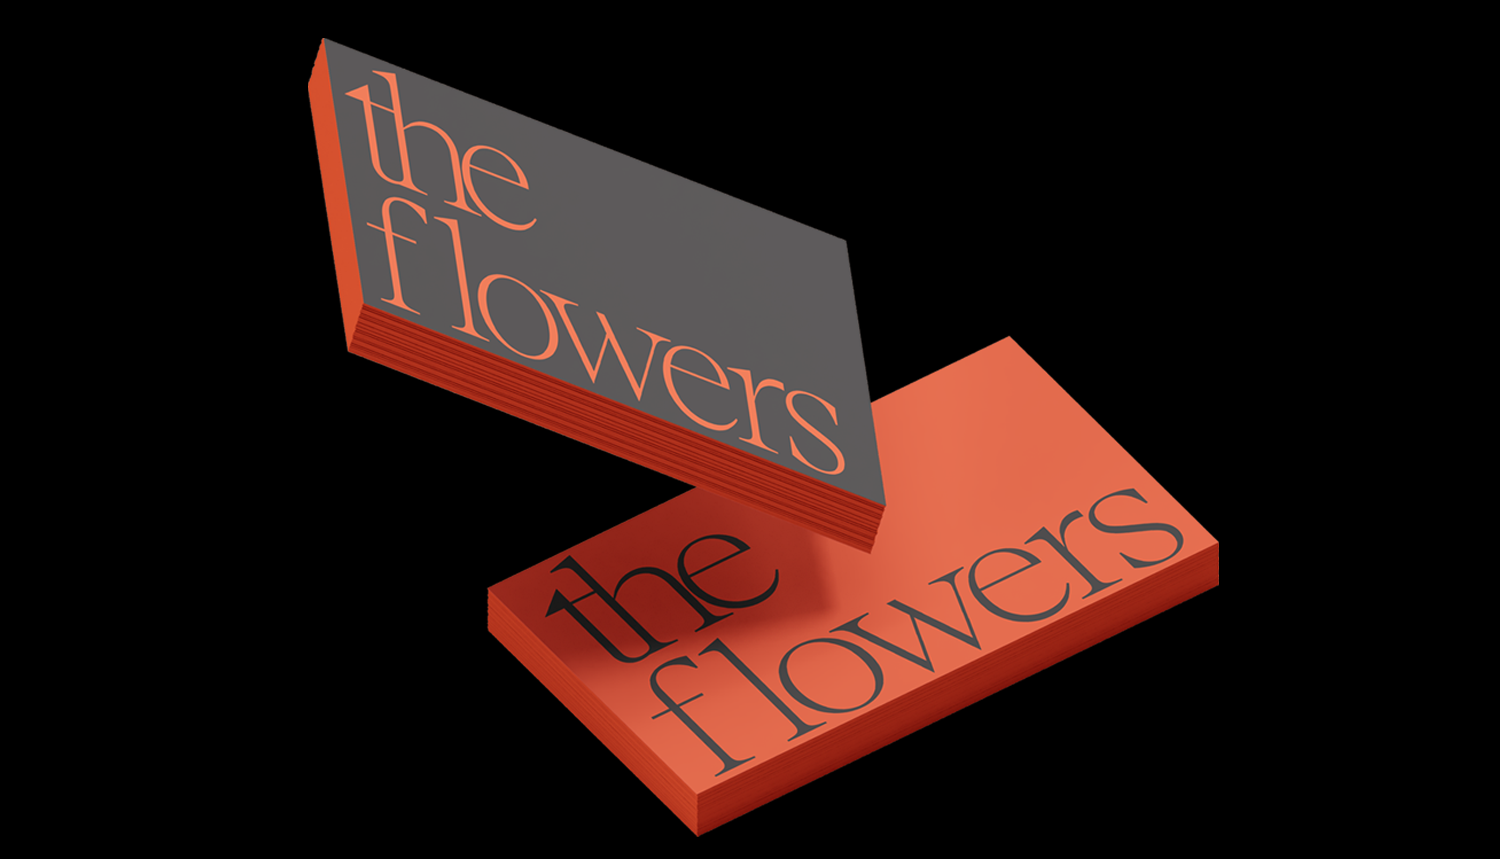 The-Flowers-Business-Cards_Black_02.png